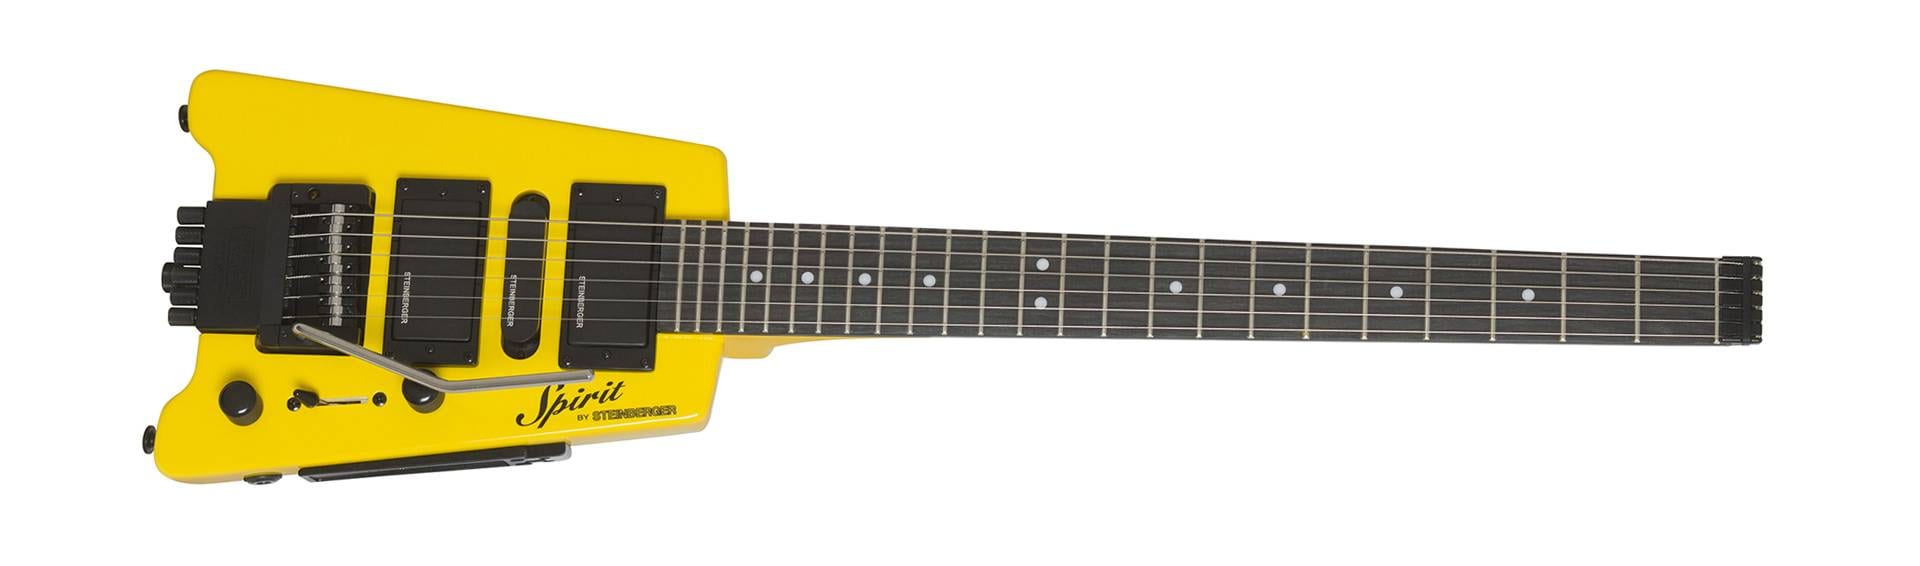 Steinberger Guitars relaunches the Spirit Collection with the GT 